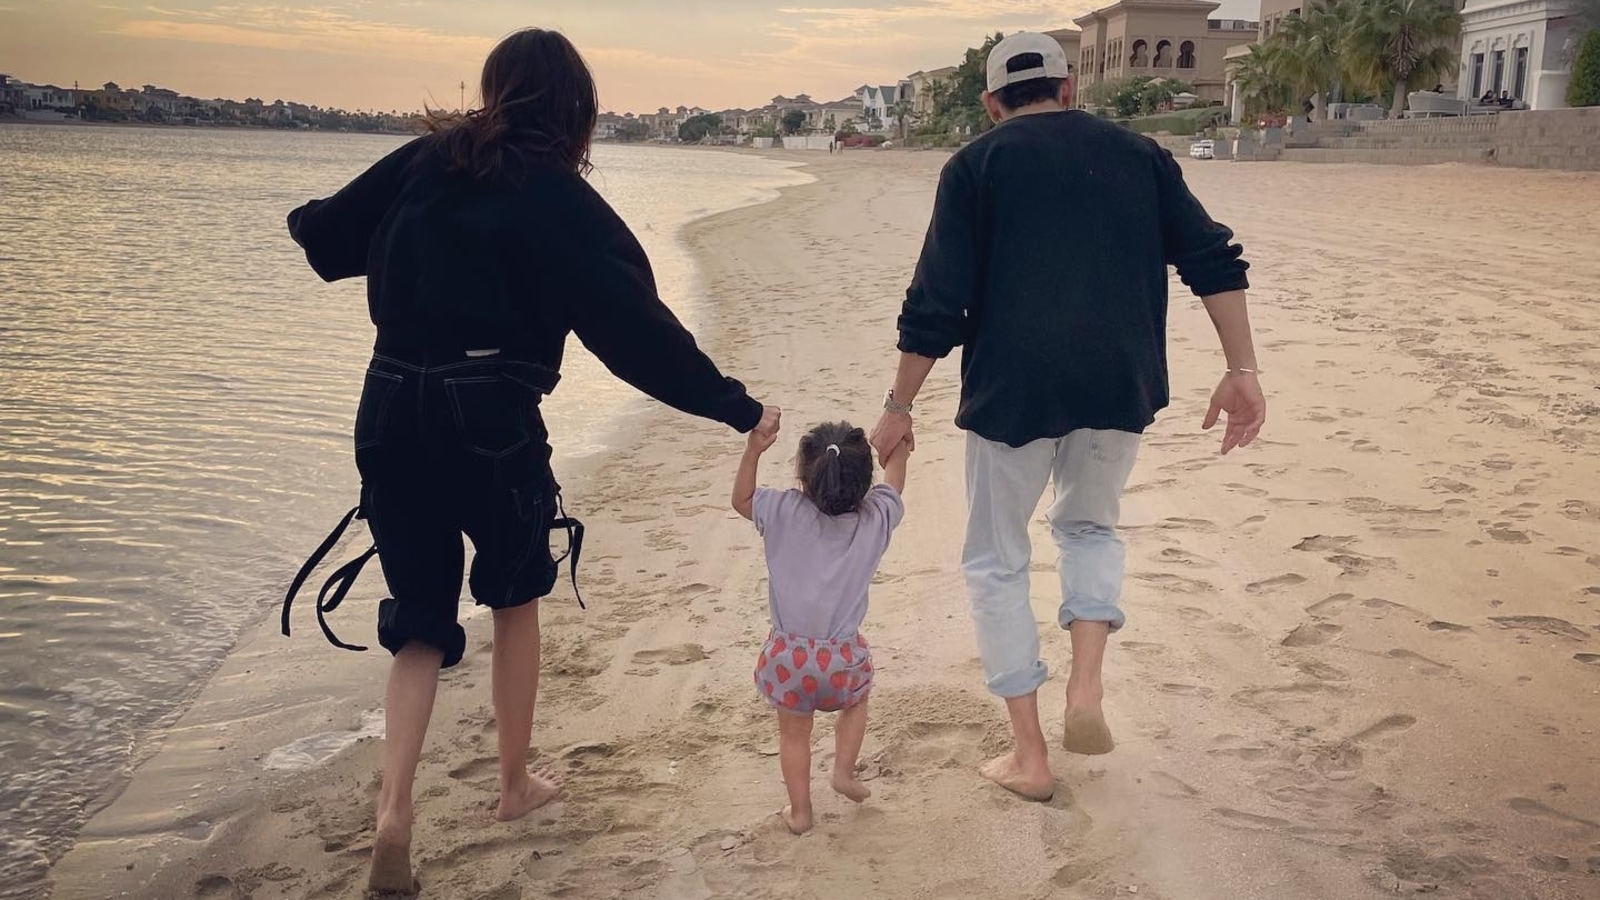 Anushka Sharma and Virat Kohli play with daughter Vamika on beach in unseen pic. See post